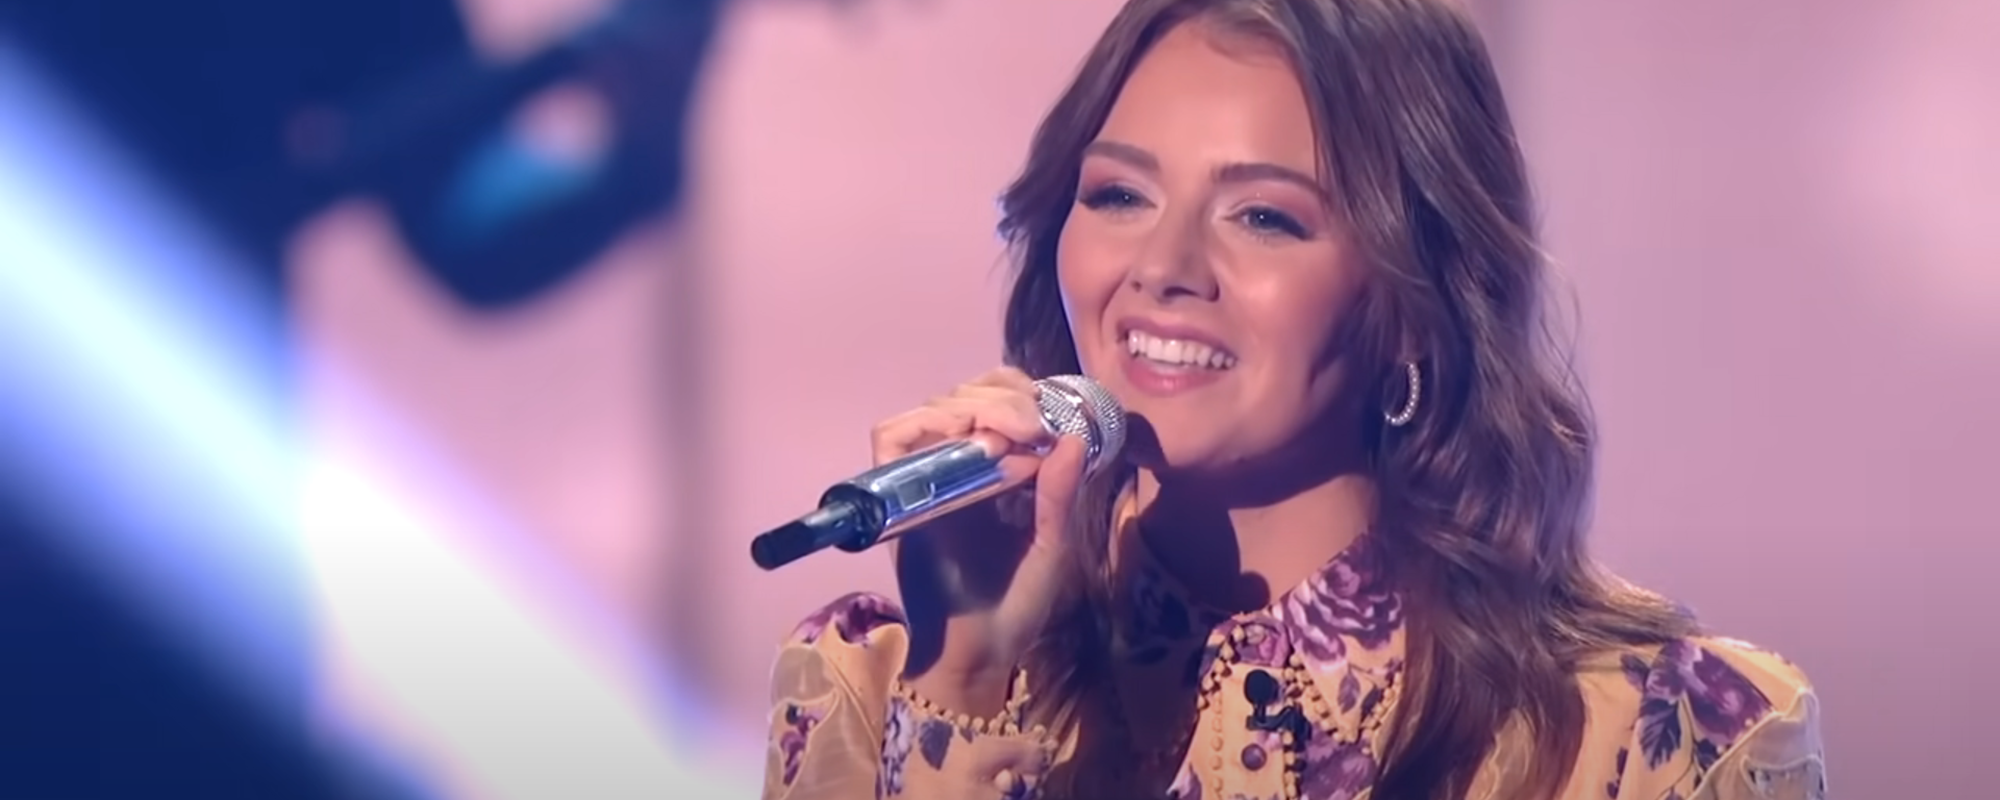 Emmy Russell Has Simple 4-Word Request for ‘American Idol’ Fans Heading Into the Top 14